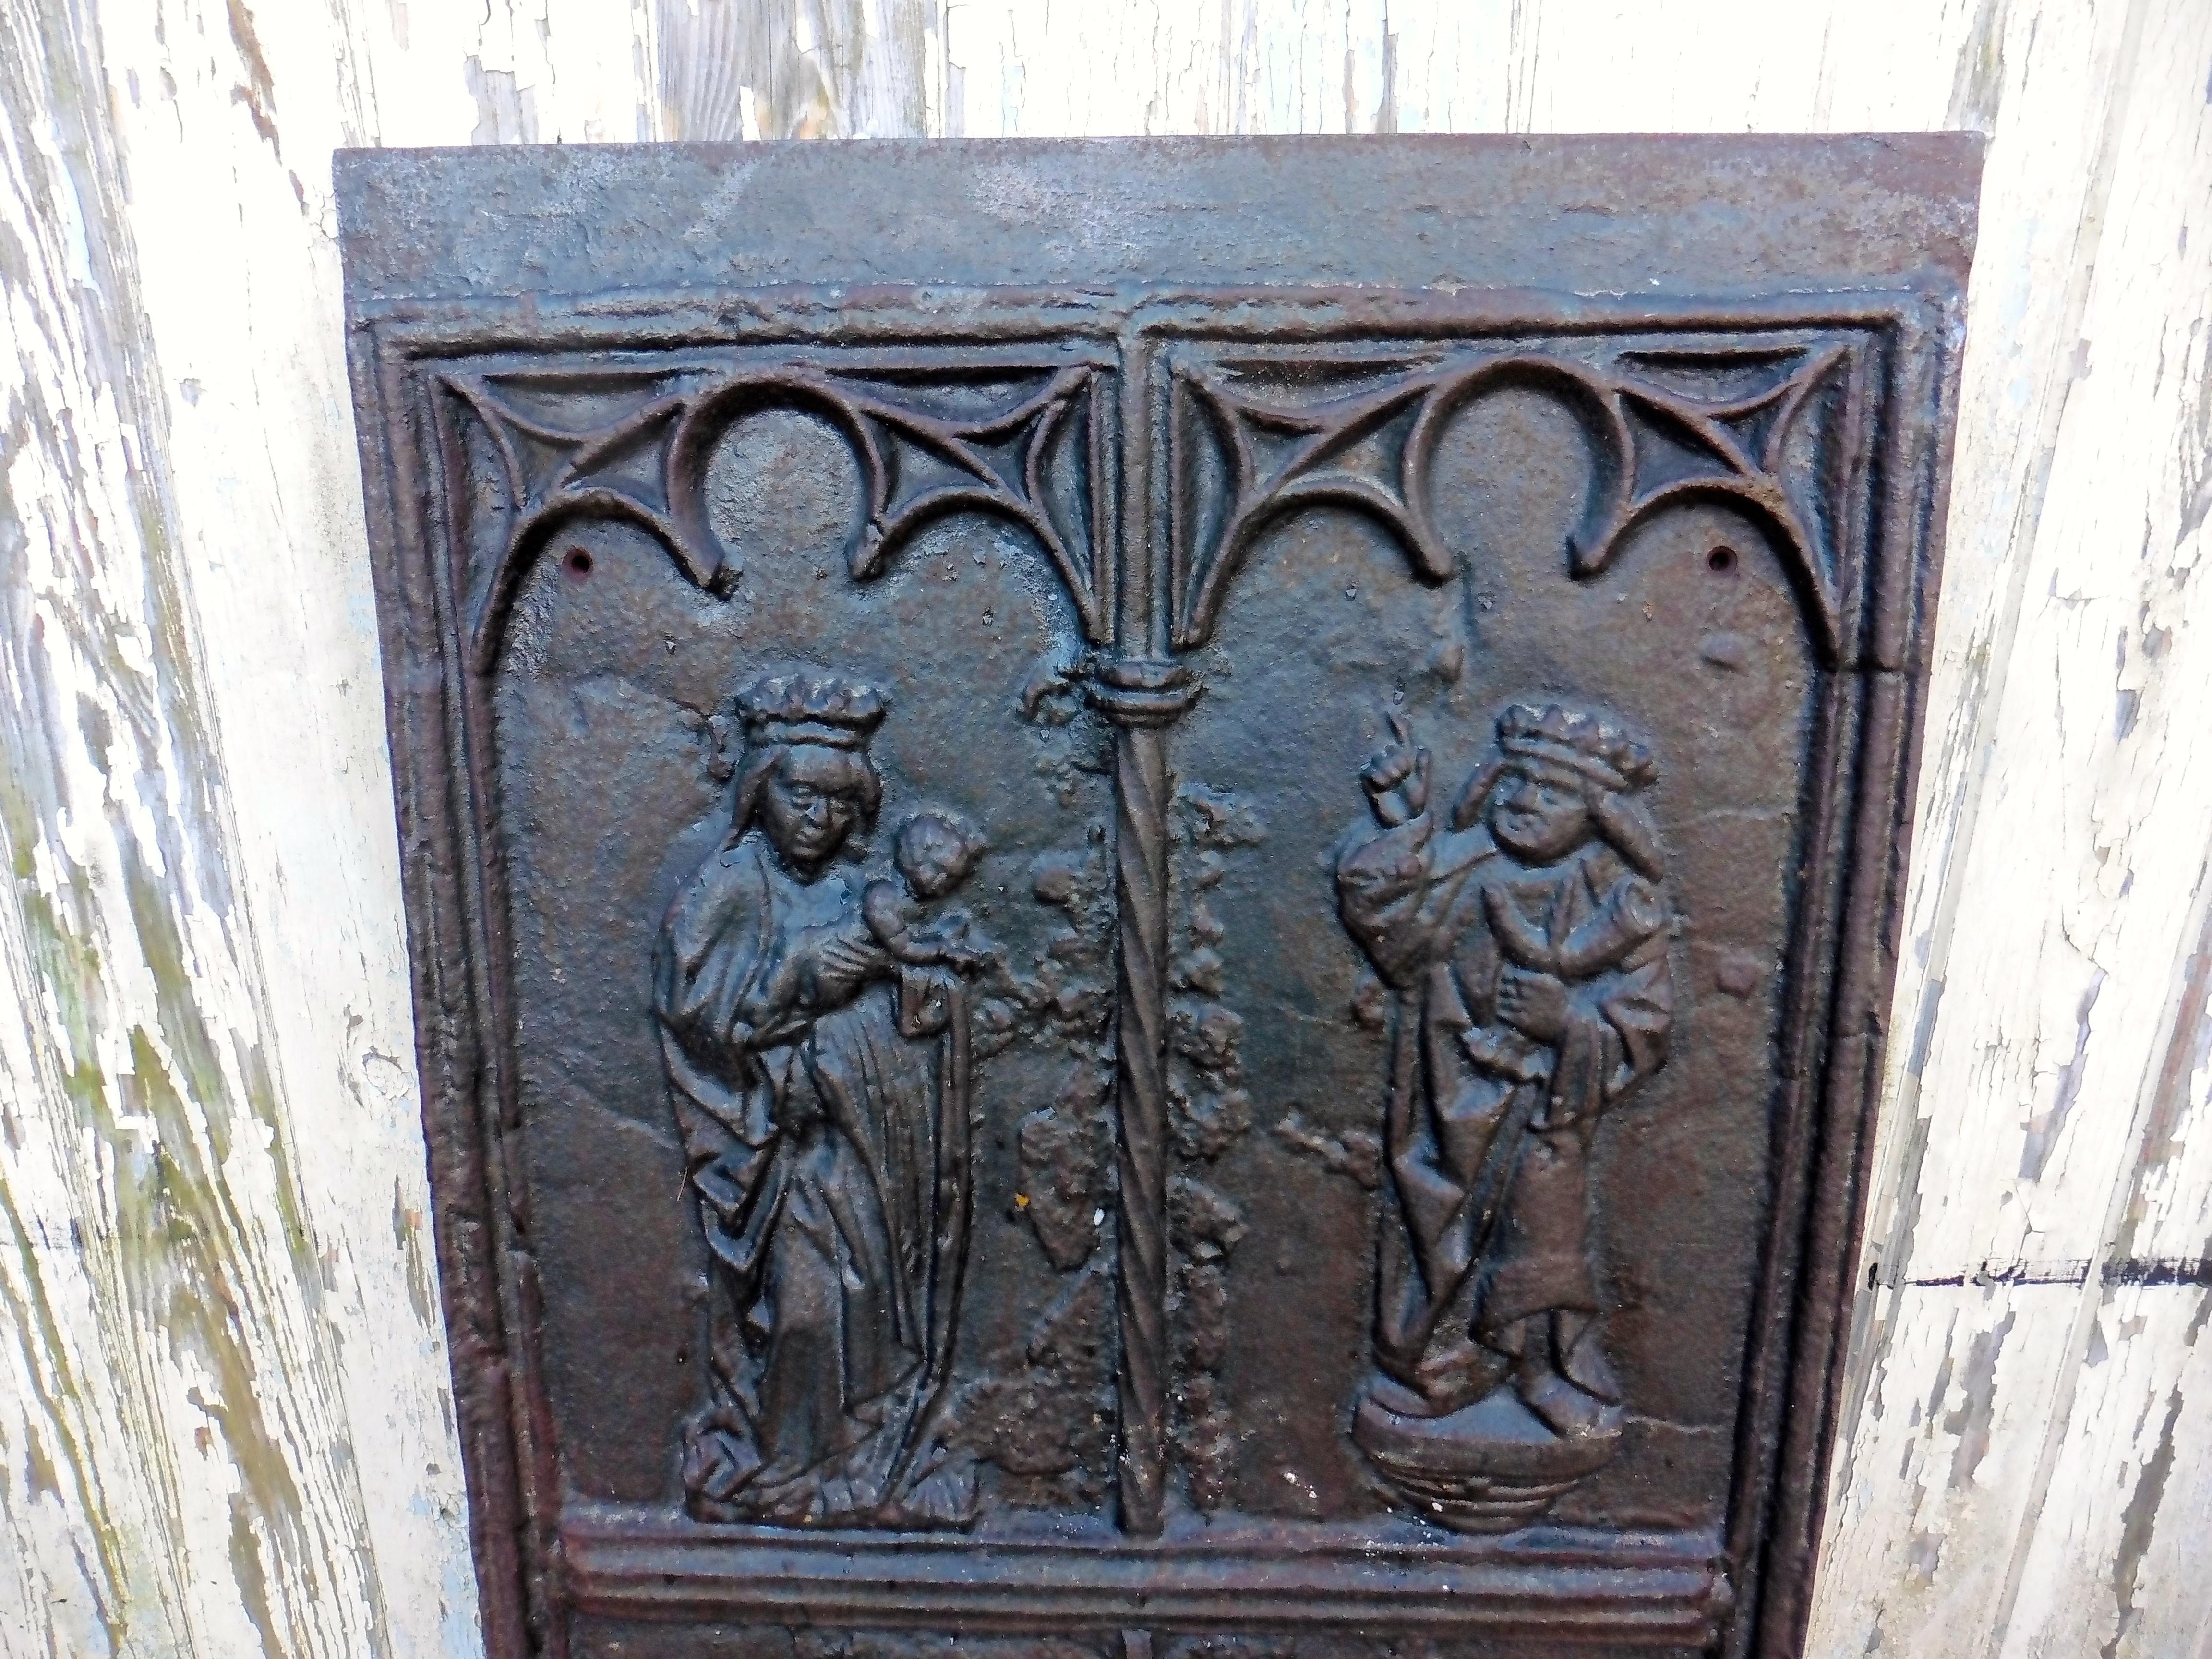 Huge medieval French iron ecclesiastical panel a wonderful inglenook fire back

This is a very old piece, as far as I can find out it was found behind a 19th century fireplace. The panel shows various medieval looking religious figures, in each